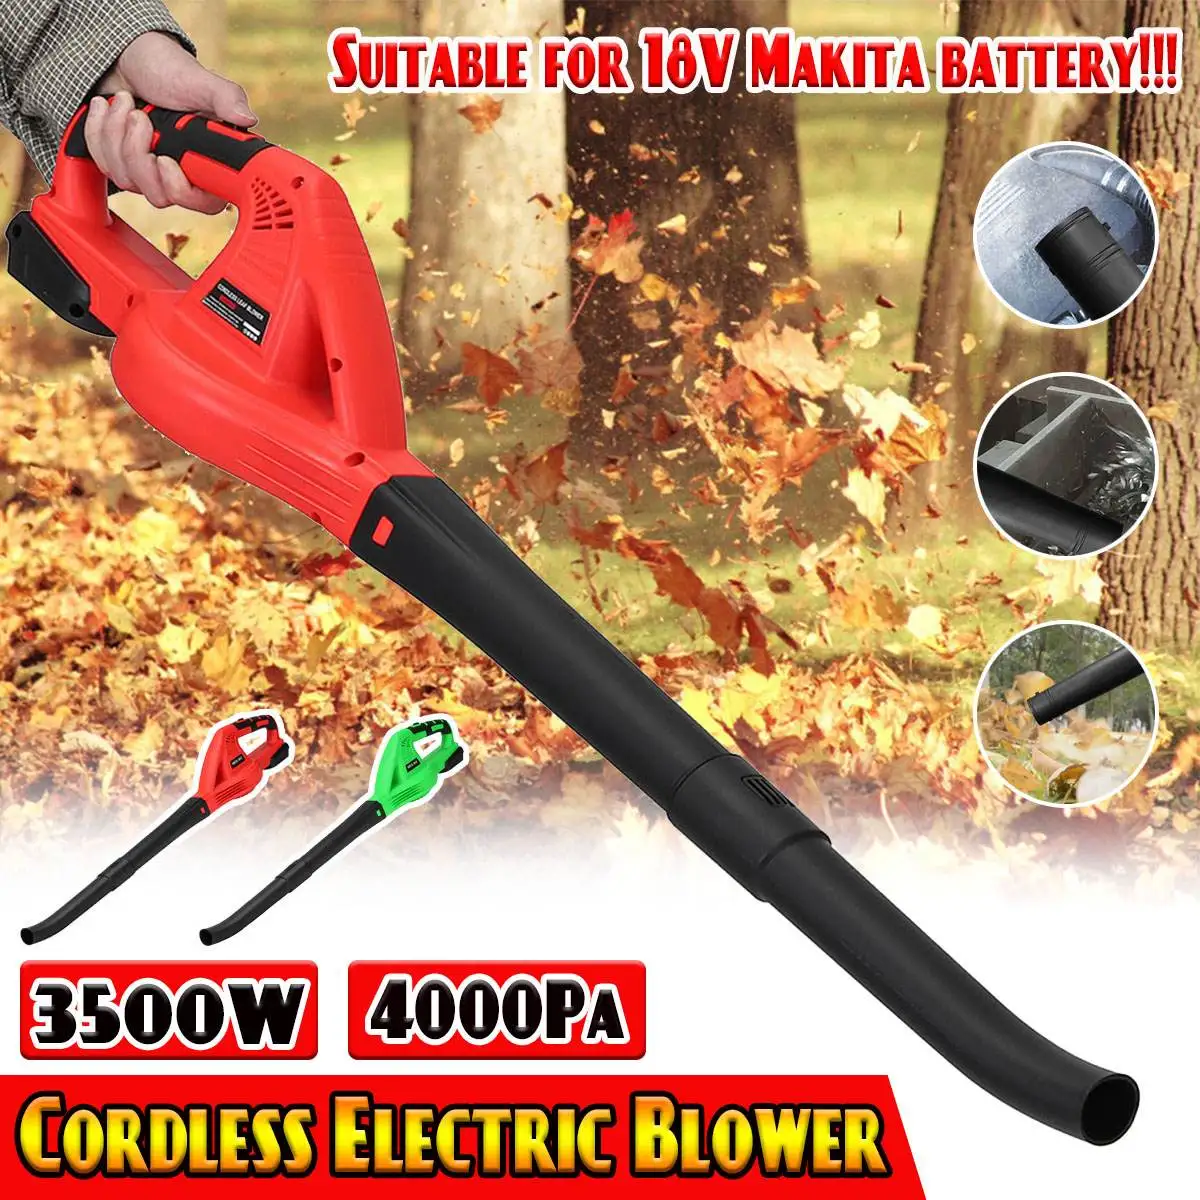 

3500W 4000Pa Cordless Electric Air Blower Handheld Leaf Blower Dust Collector Sweeper Garden Tools for Makita 18V Battery